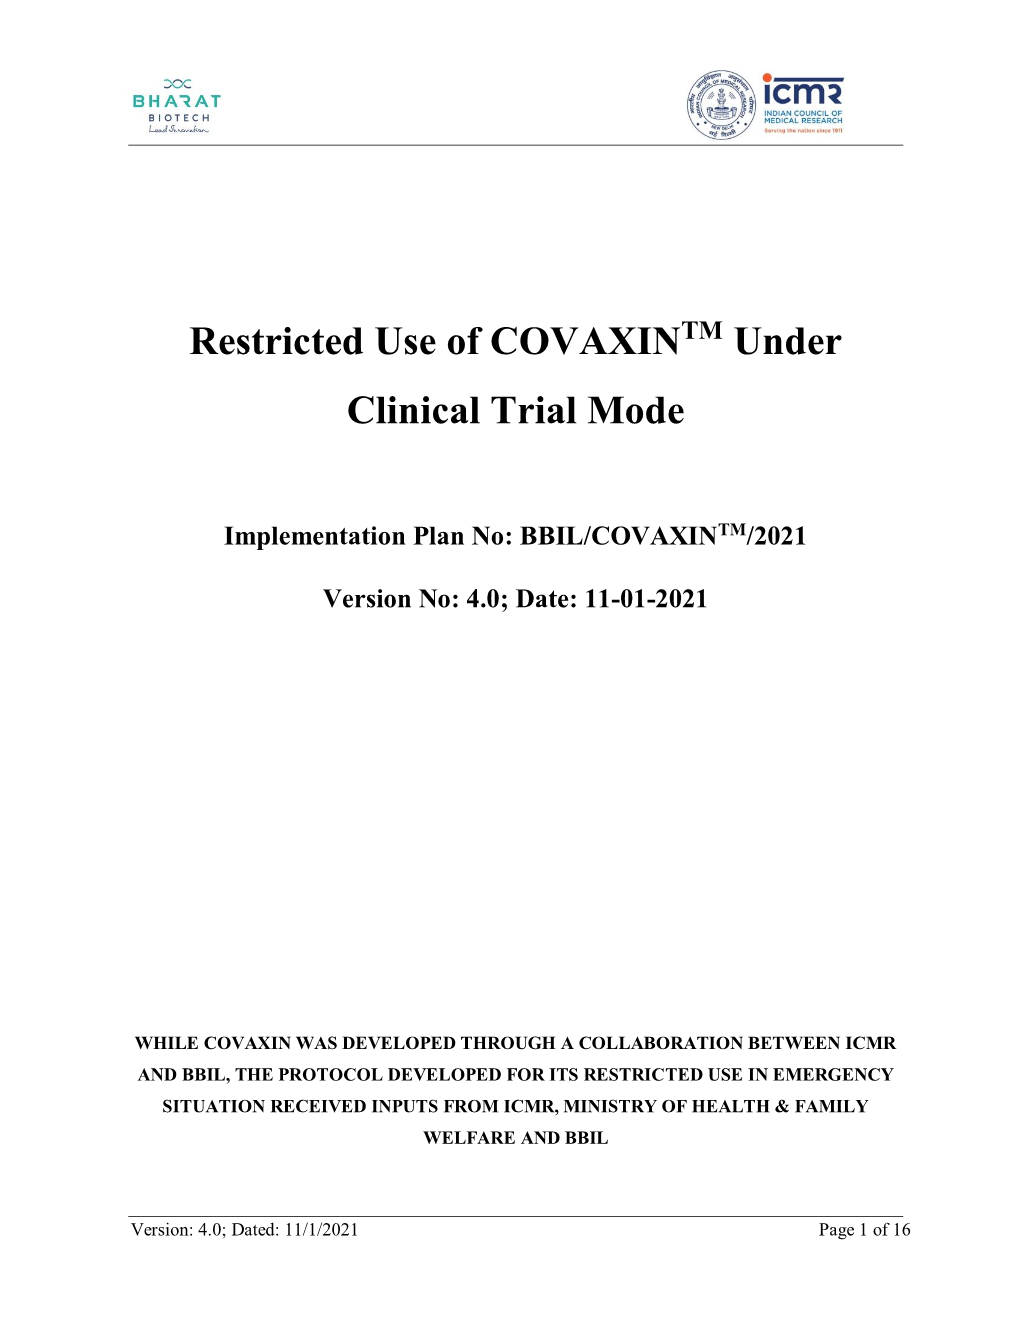 Restricted Use of COVAXIN Under Clinical Trial Mode